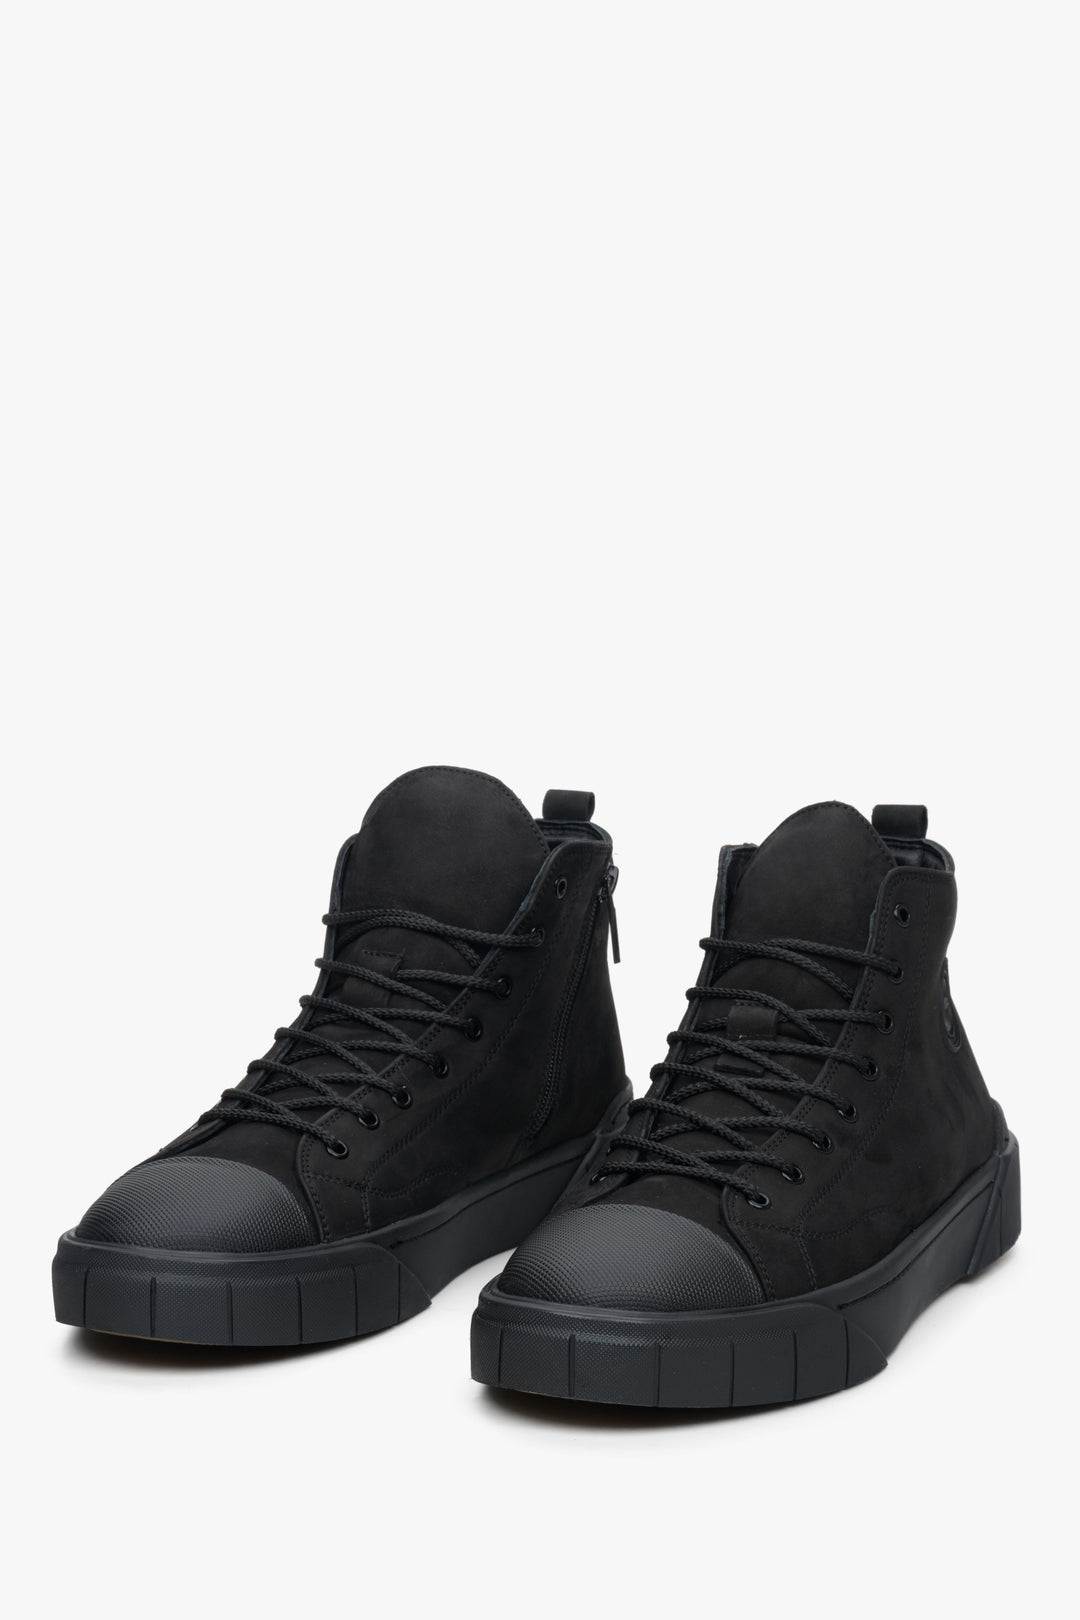 Men's black high-top winter sneakers in suede by Estro - close-up on the toe of the shoe.